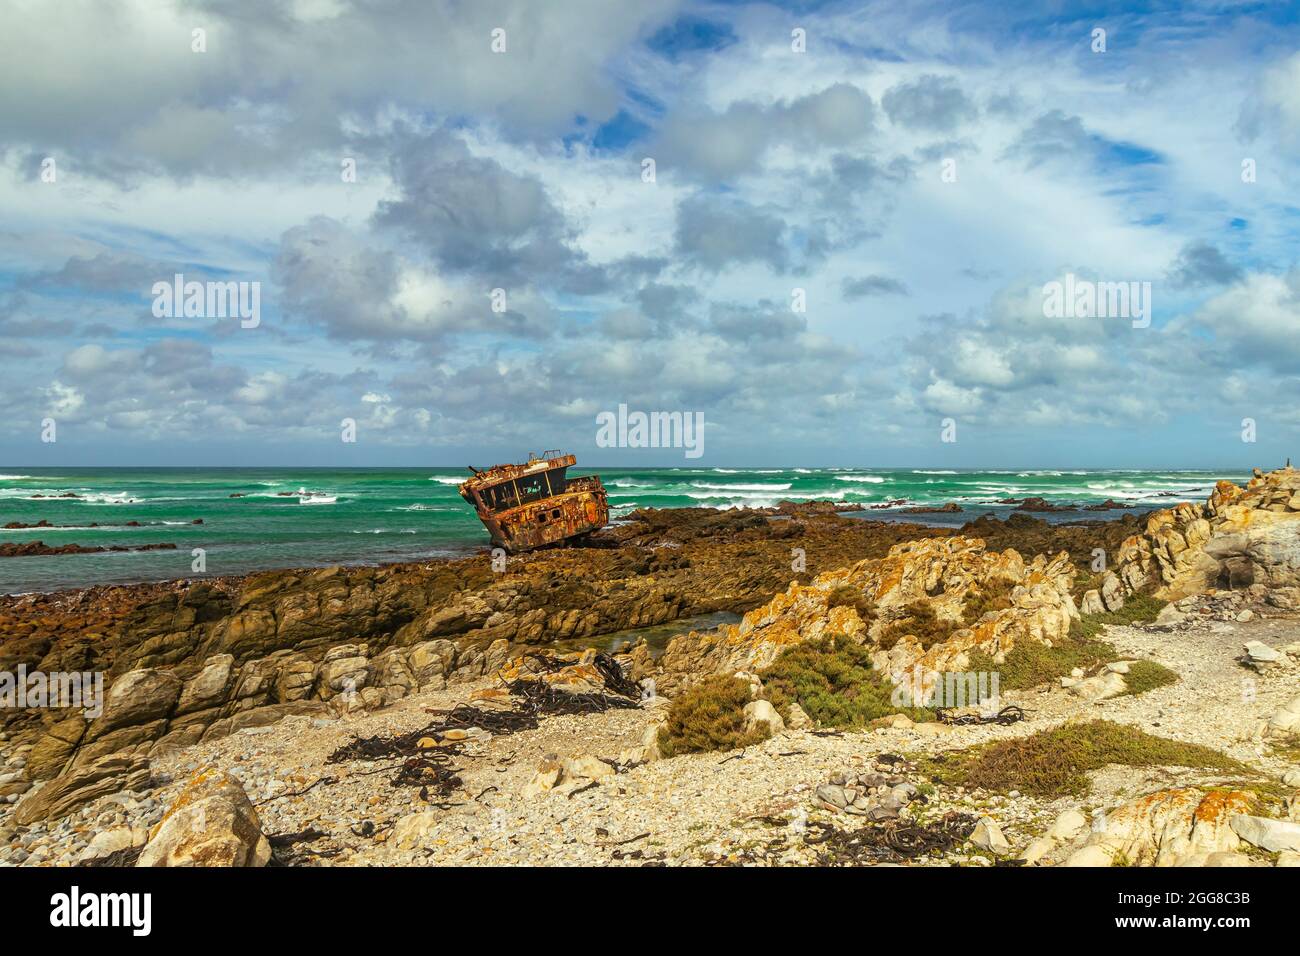 Rugged rocky shore with rusted shipwreck of Meisho Maru No.38 at Cape Agulhas in South Africa which is the southernmost point of African Continent. Stock Photo